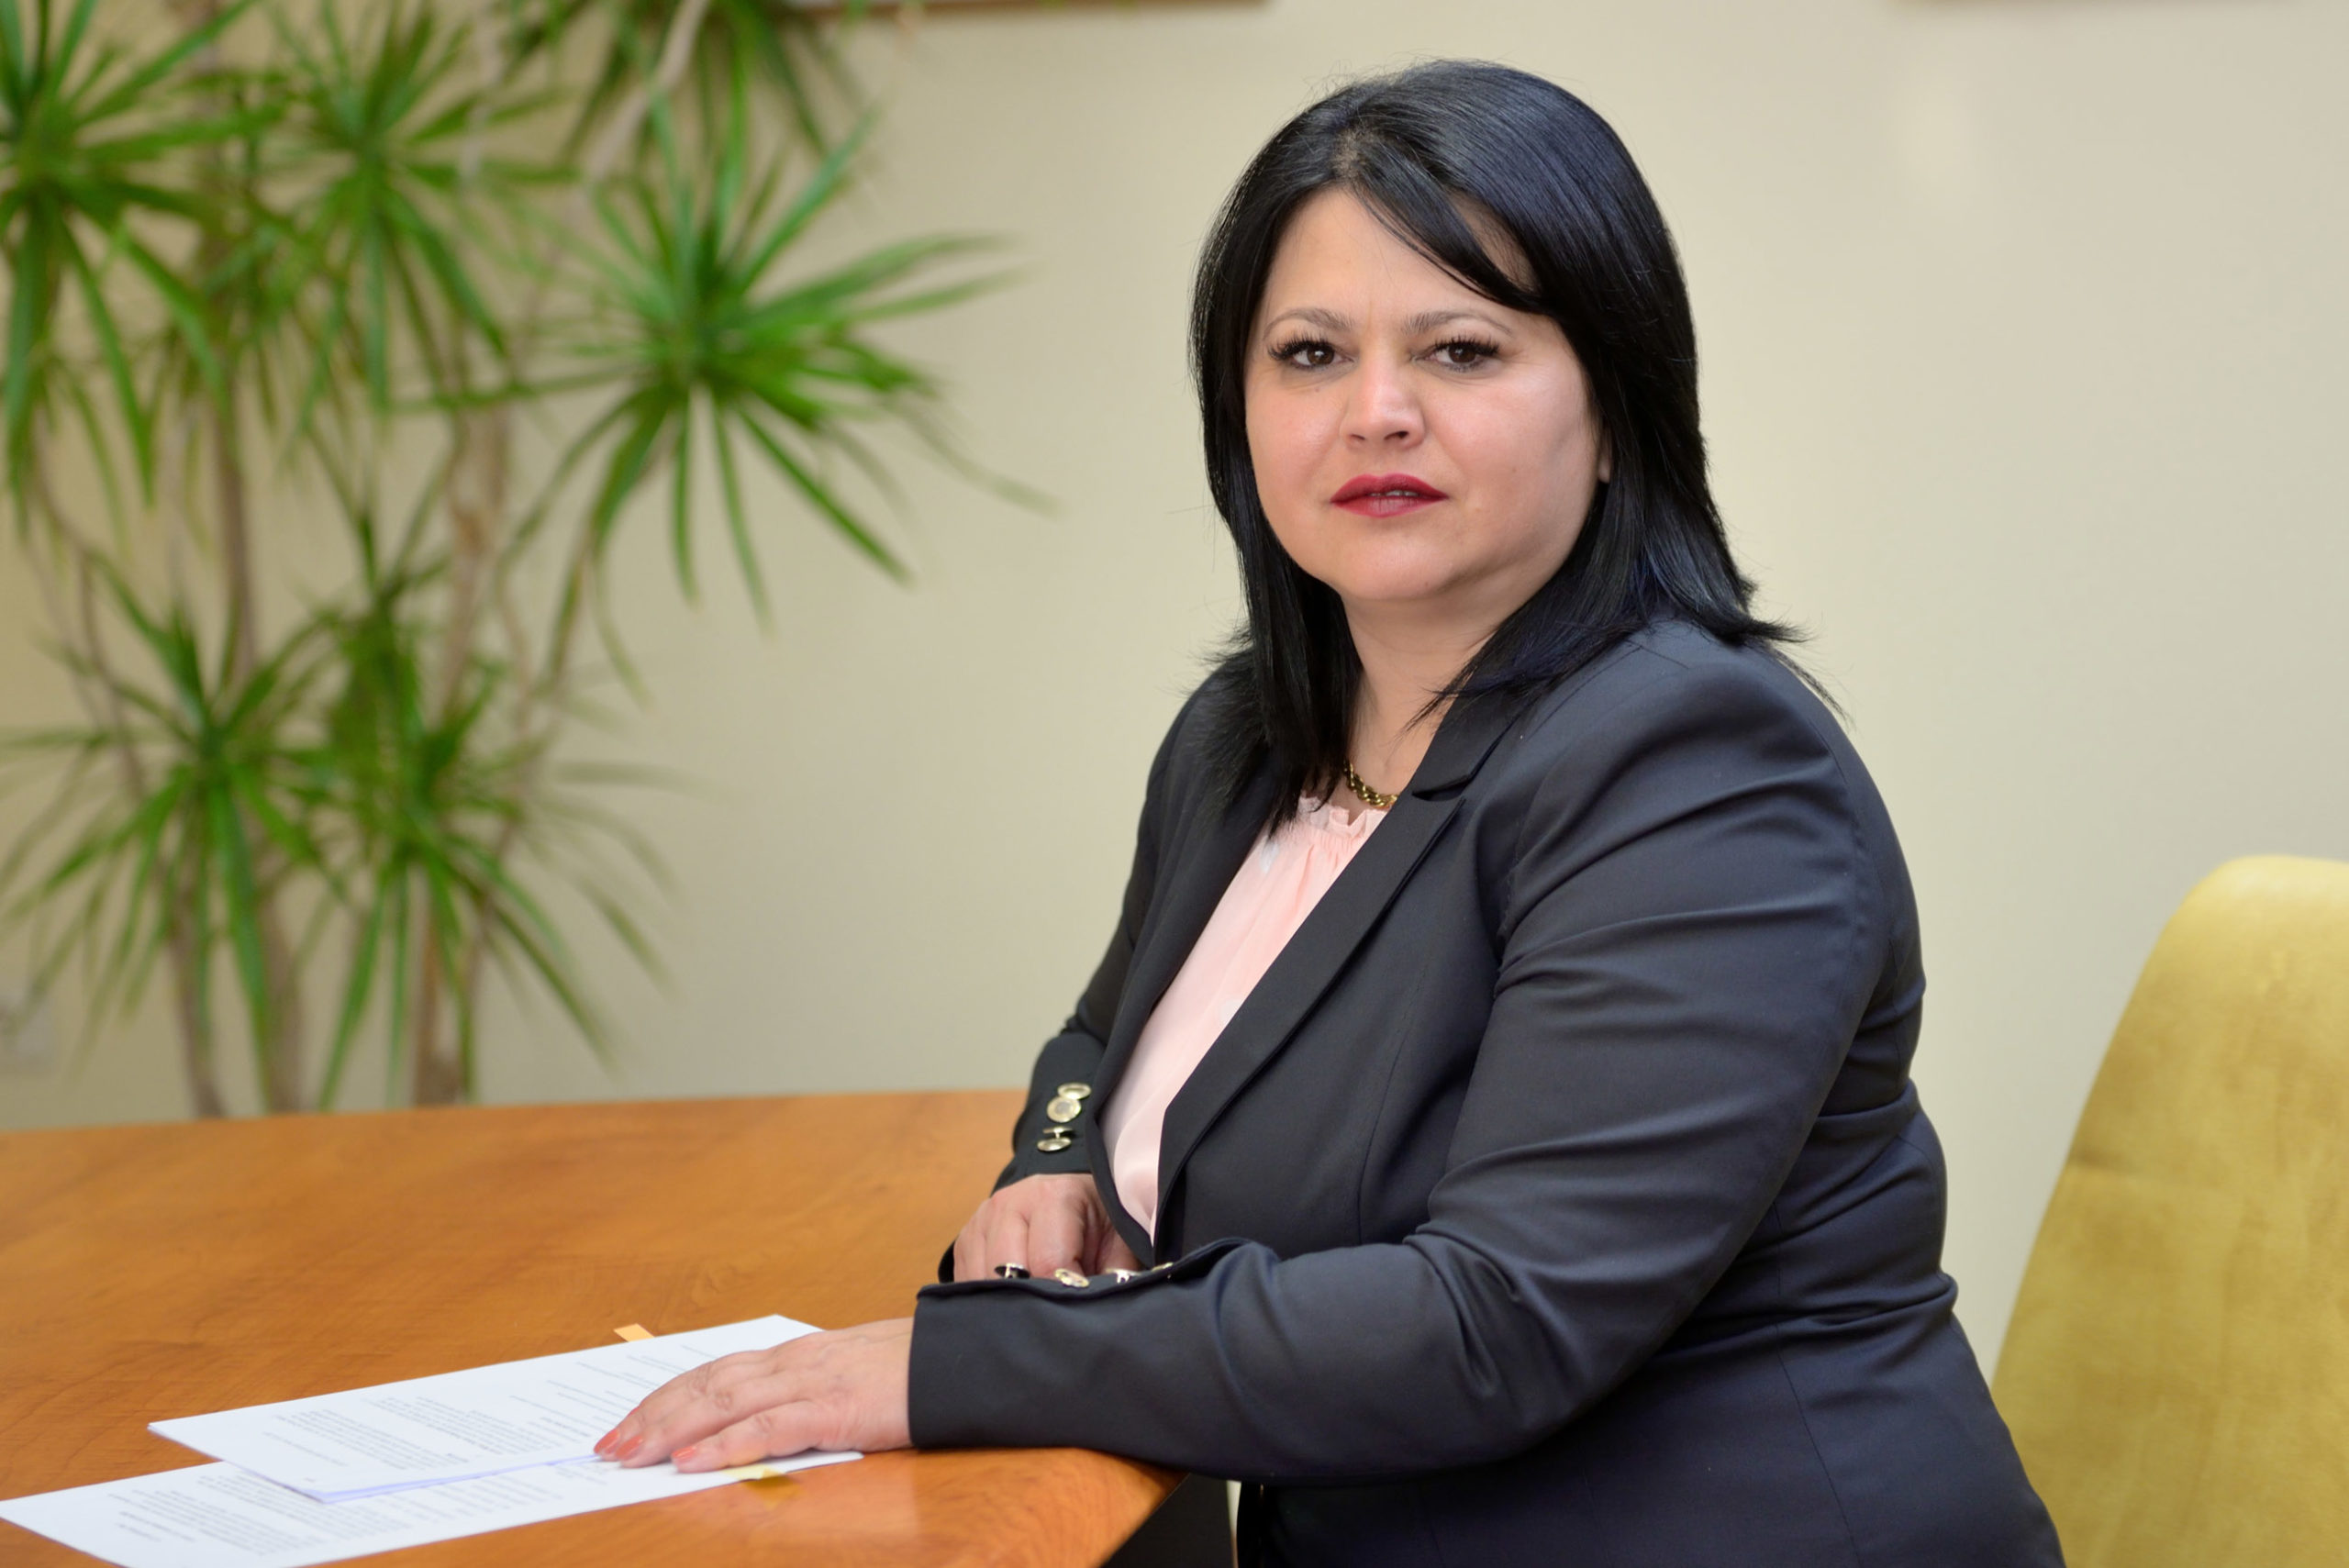 LIBERTY Galati appoints its first female General Director